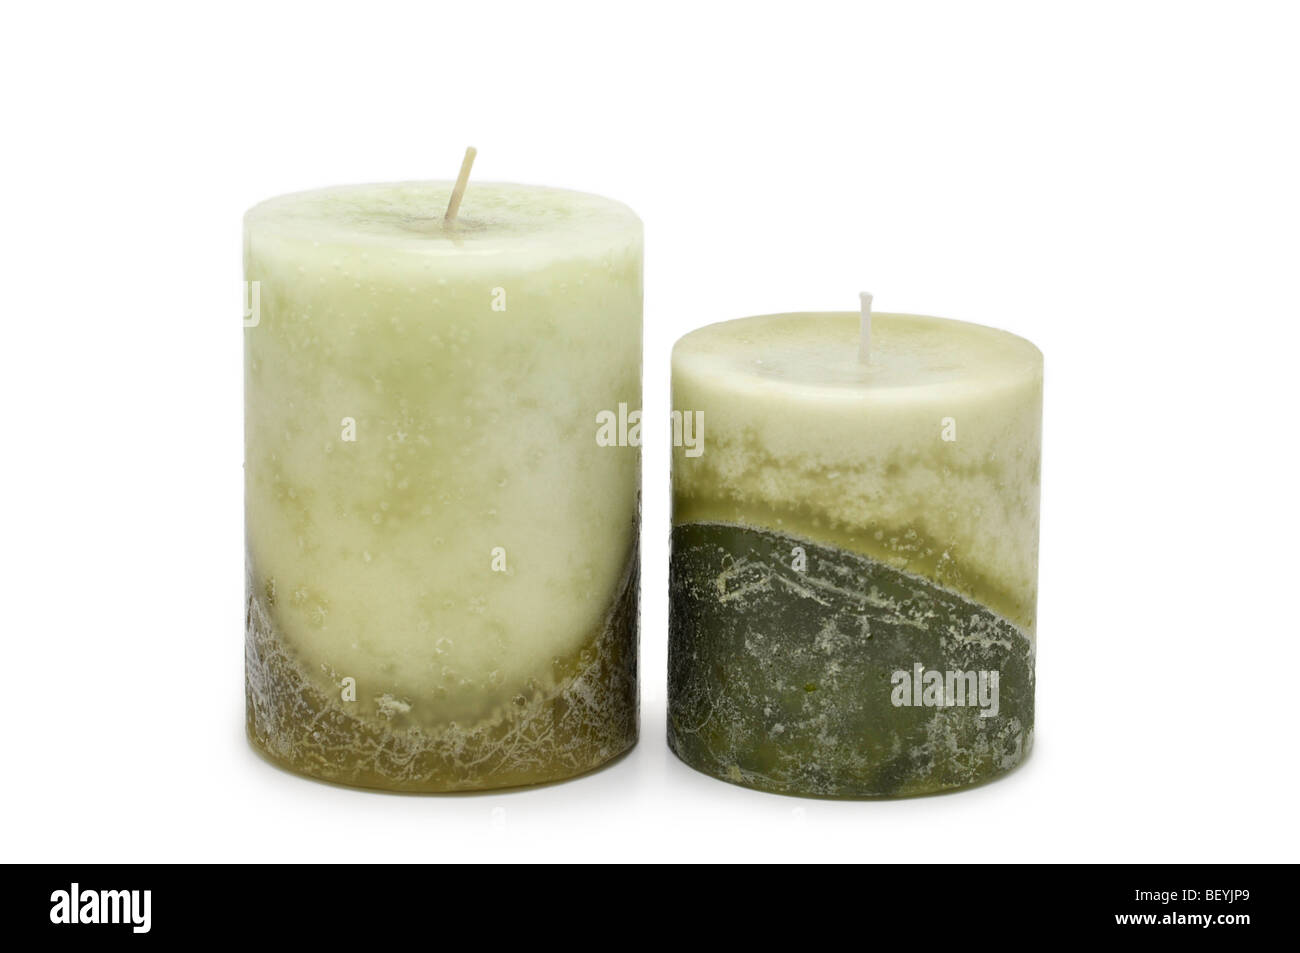 Scented Candles -Green Tea Scent Stock Photo